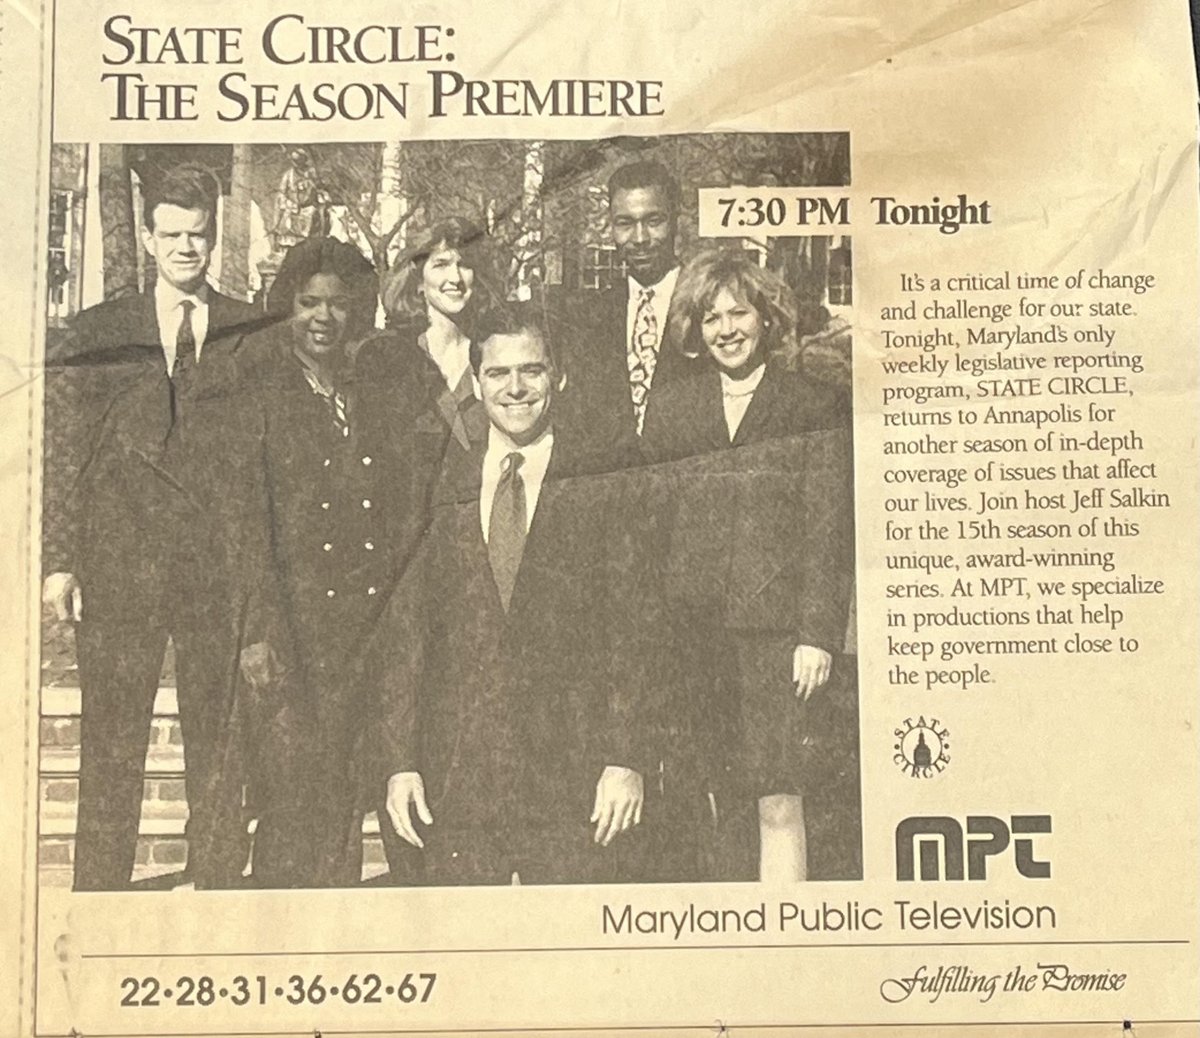 From the archives... newspaper ad promoting the 1995 season of State Circle.  Our 43rd season starts tonight!  MPT's veteran reporting team of @C3Newsman, @UMNewsie, and Nancy Yamada bring the State House to your house every Friday evening at 7:00. @mptnews @marylandpubtv